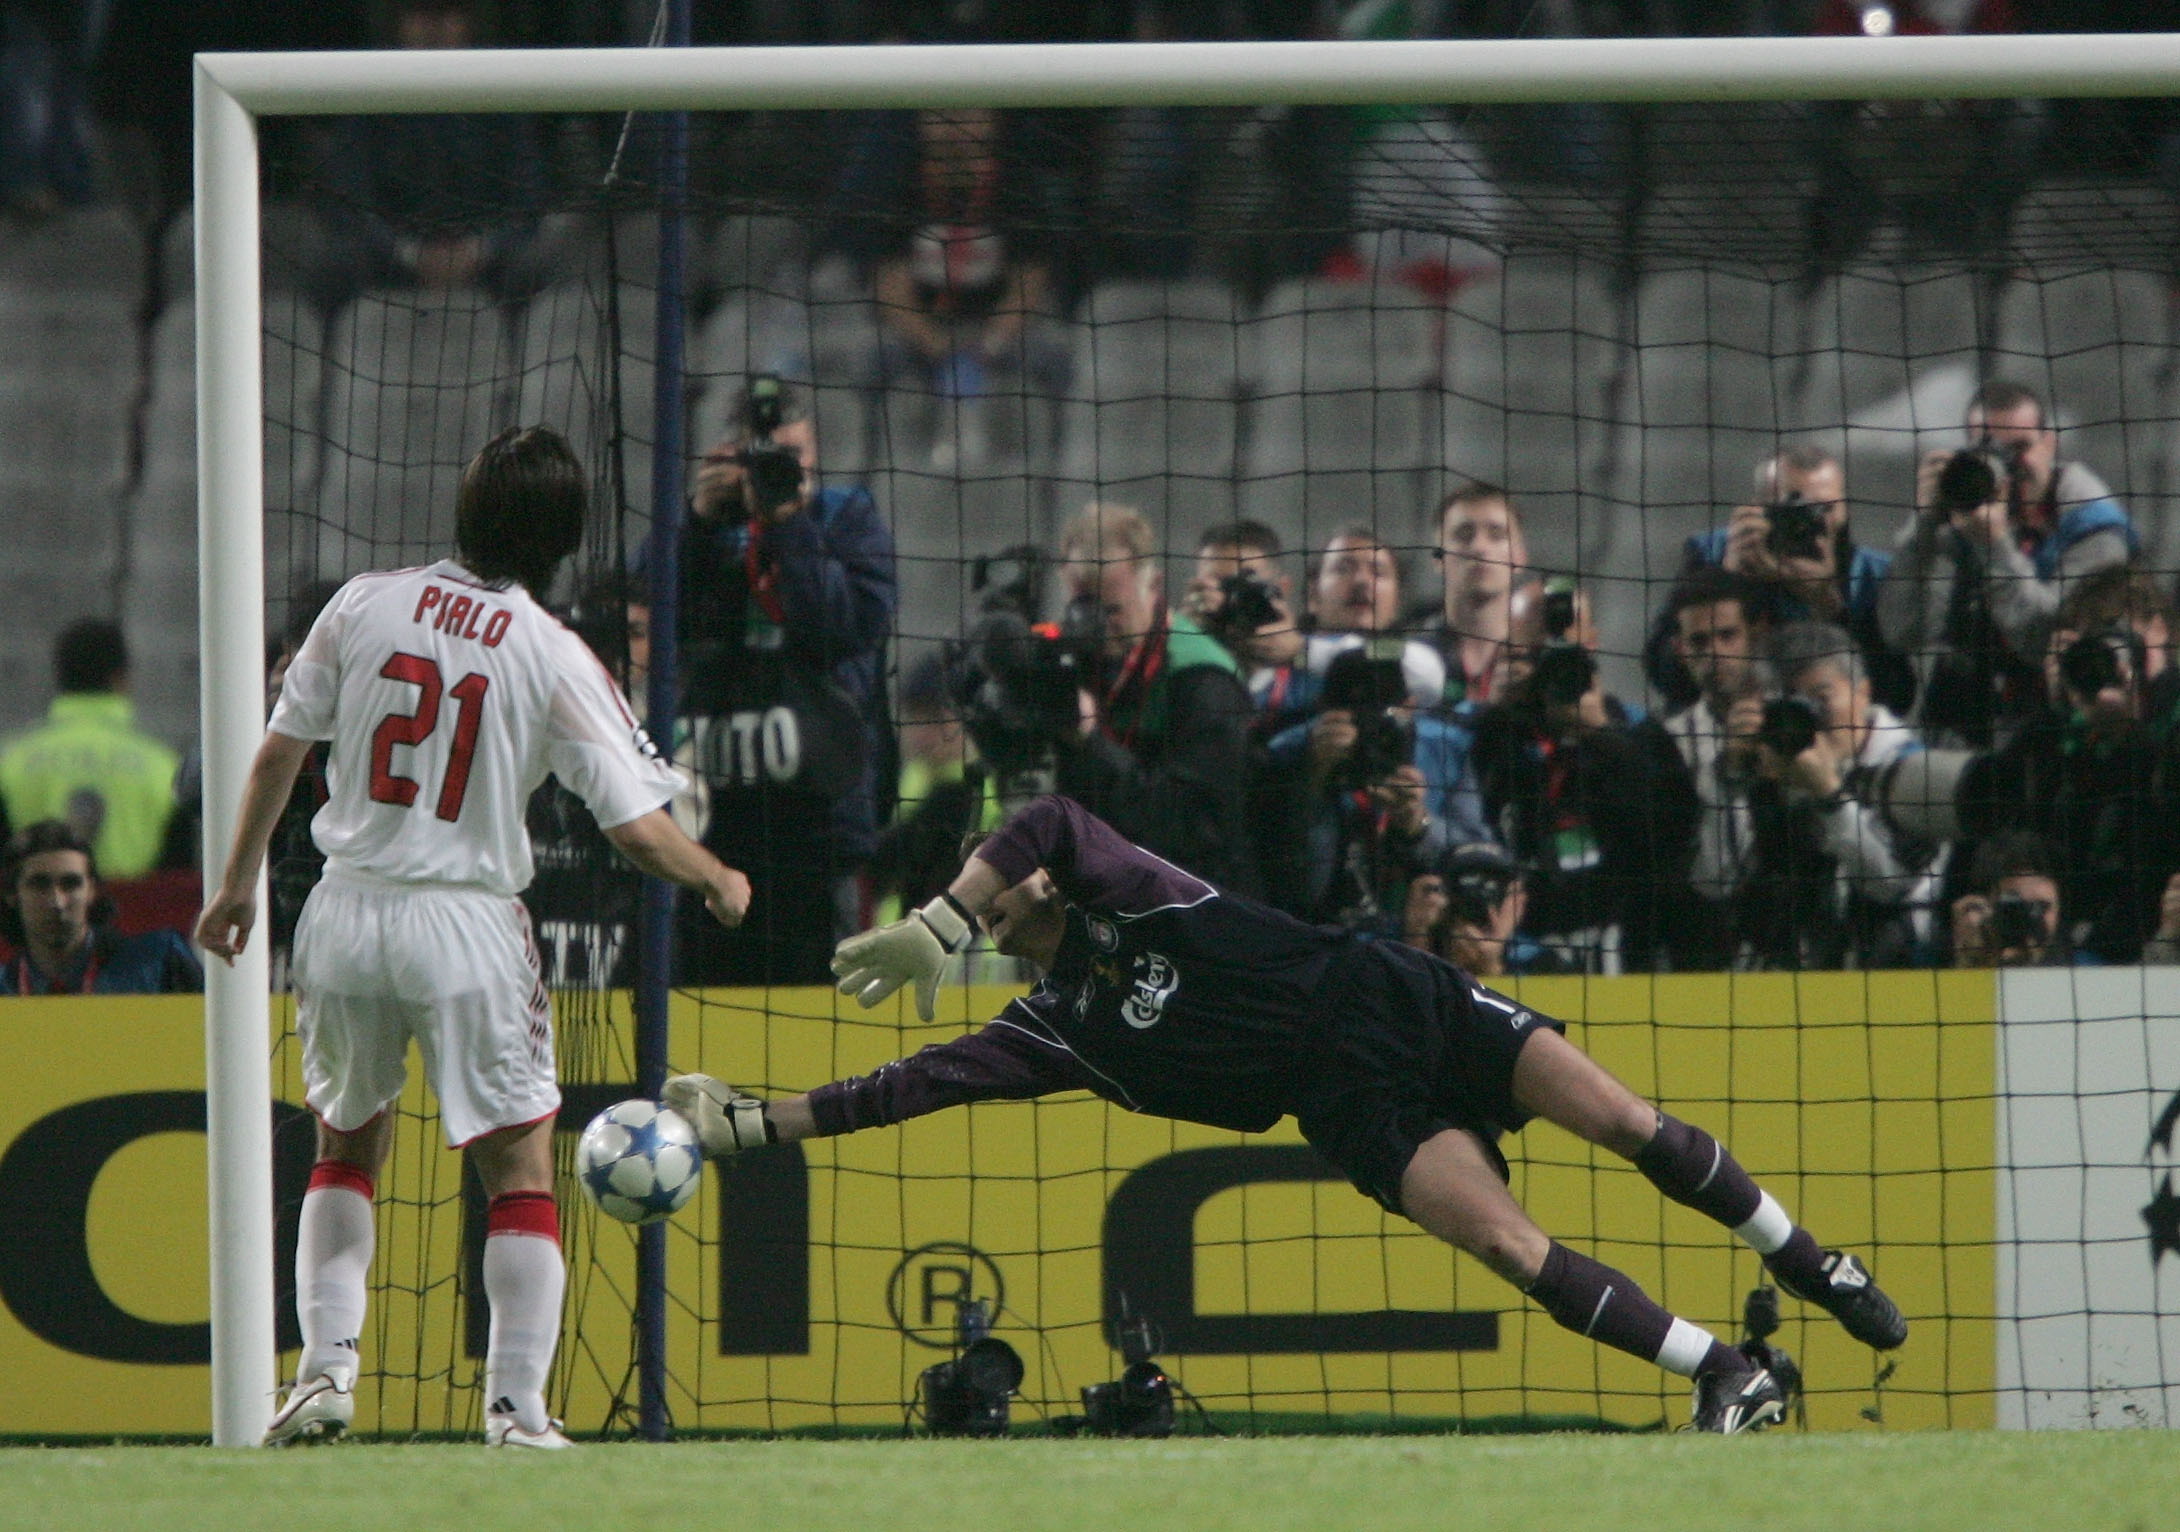 ISTANBUL, TURKEY - MAY 25: Liverpool goalkeeper Jerzy Dudek of Poland saves a penalty during a penalty shoot out during the European Champions League final between Liverpool and AC Milan on May 25, 2005 at the Ataturk Olympic Stadium in Istanbul, Turkey.